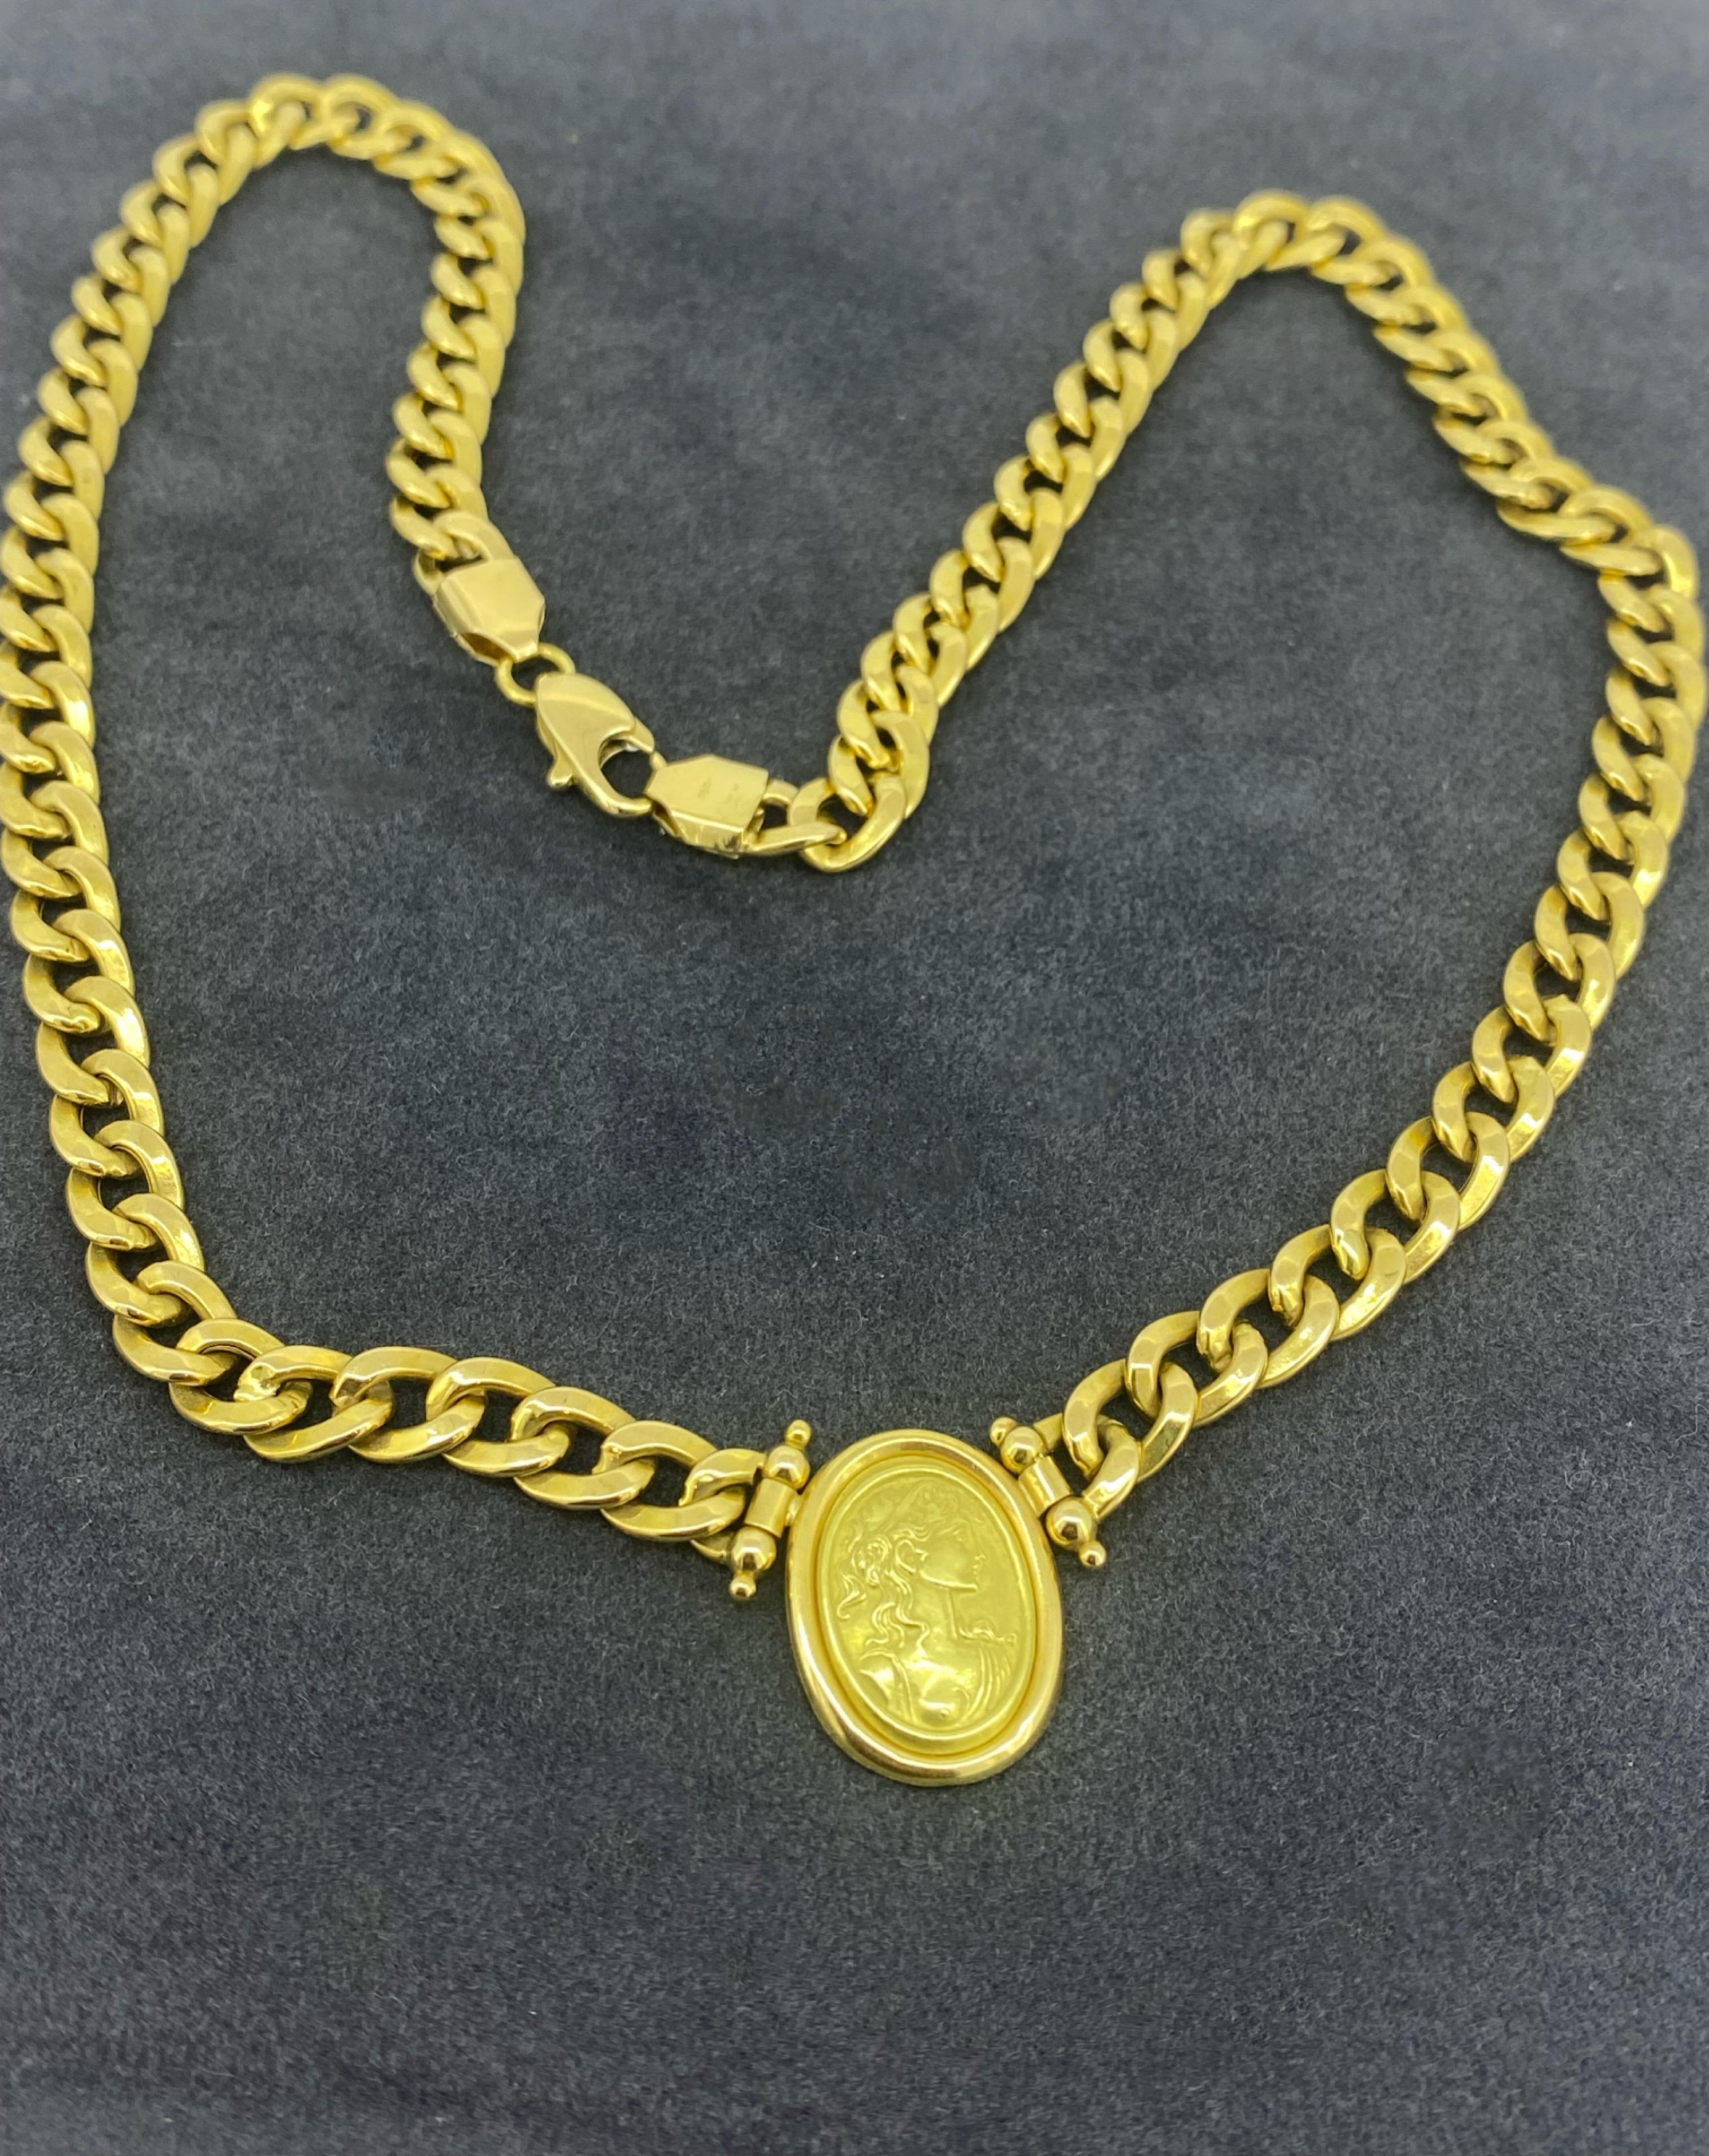 Retro 18K Yellow Gold Cameo Pendant Italian Vintage Necklace, Curb Links, 44cm long. For Sale